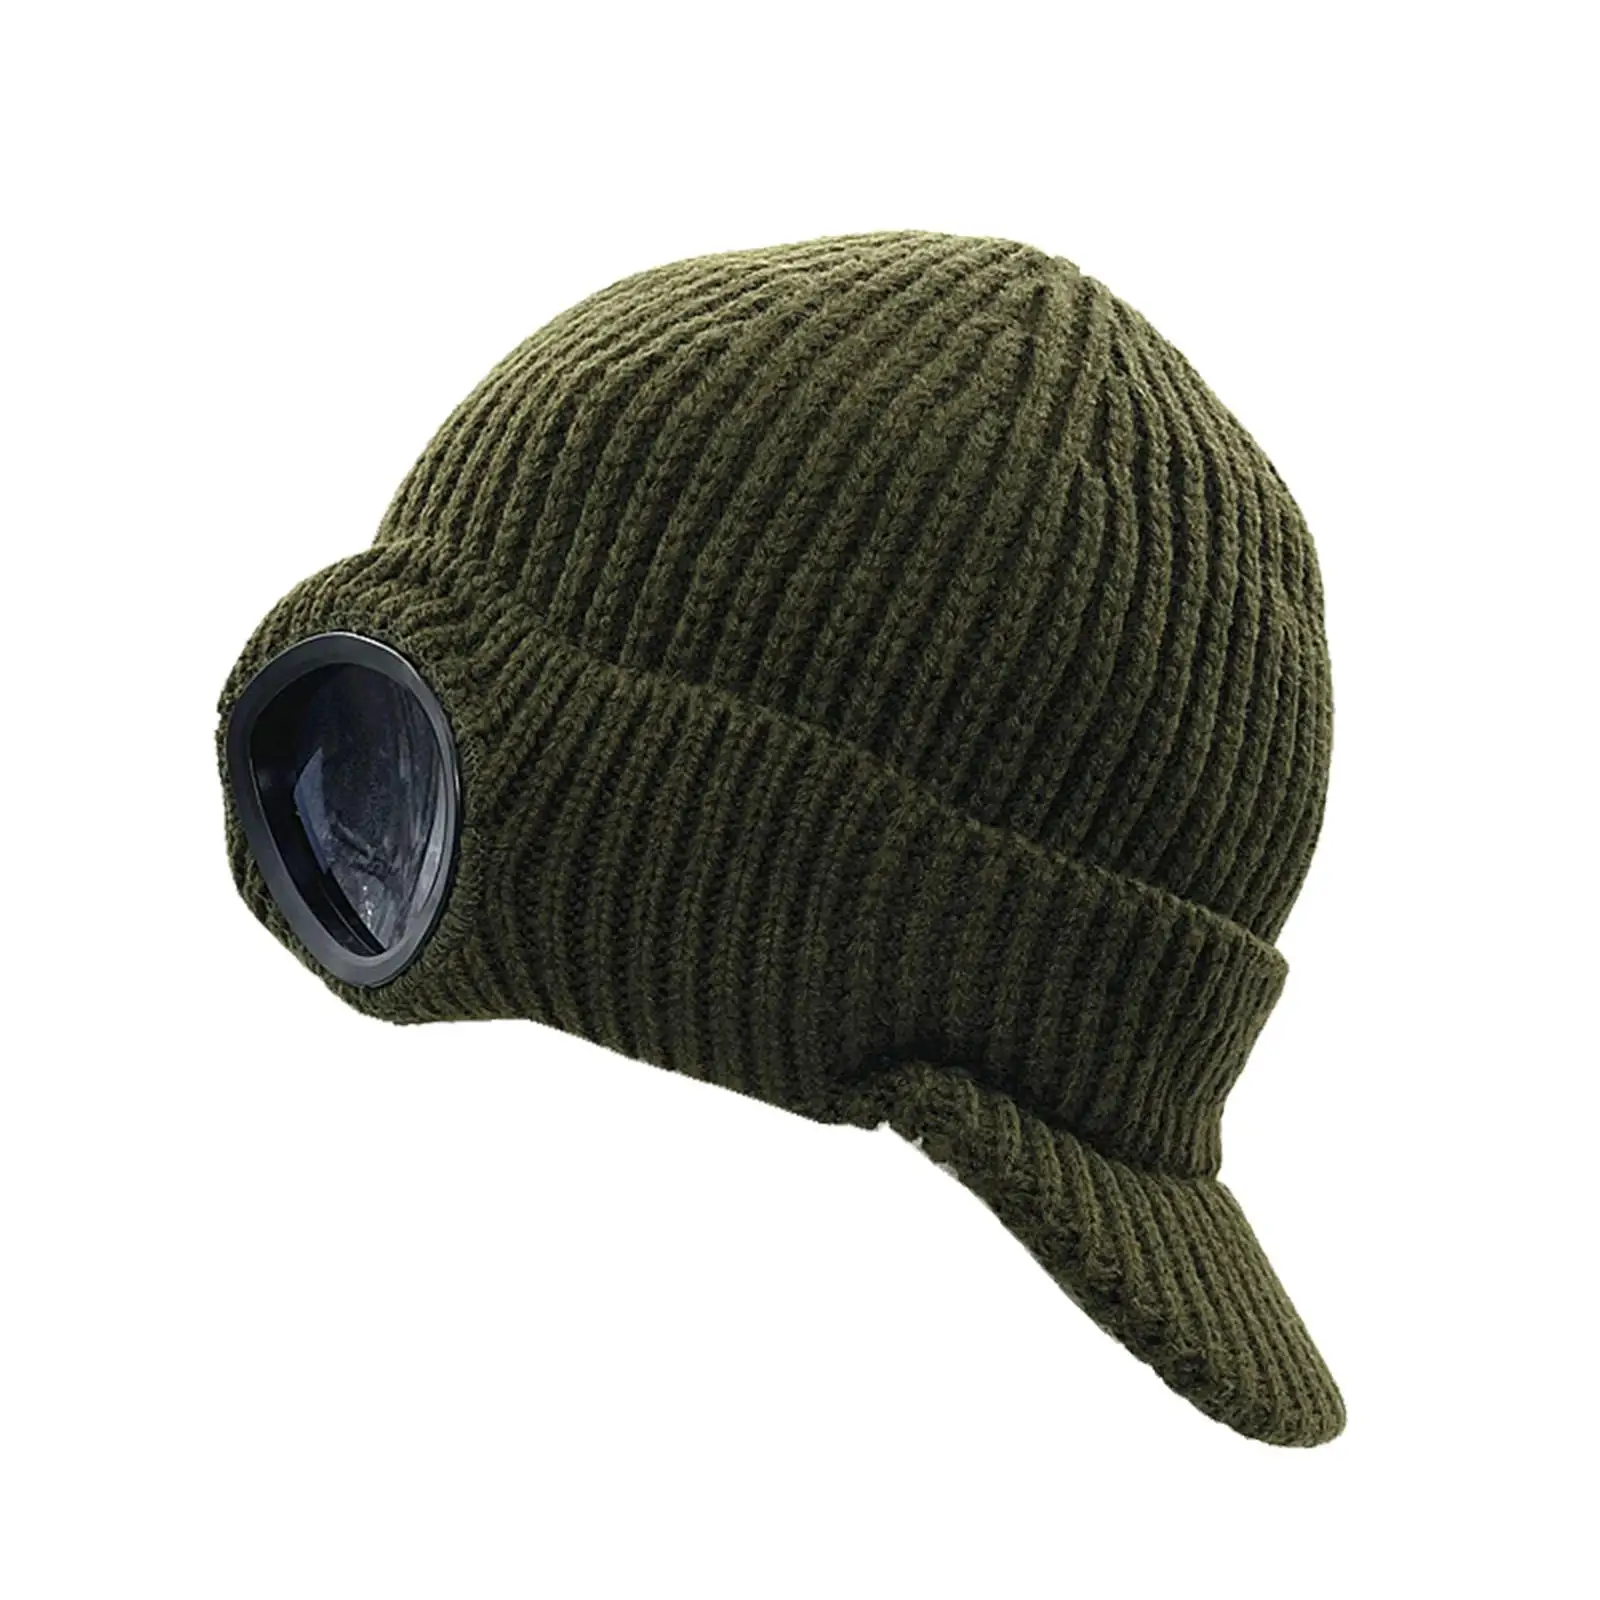 Men`s knitted newsboy hat, glasses, cap, winter, warm, windproof, peaked,